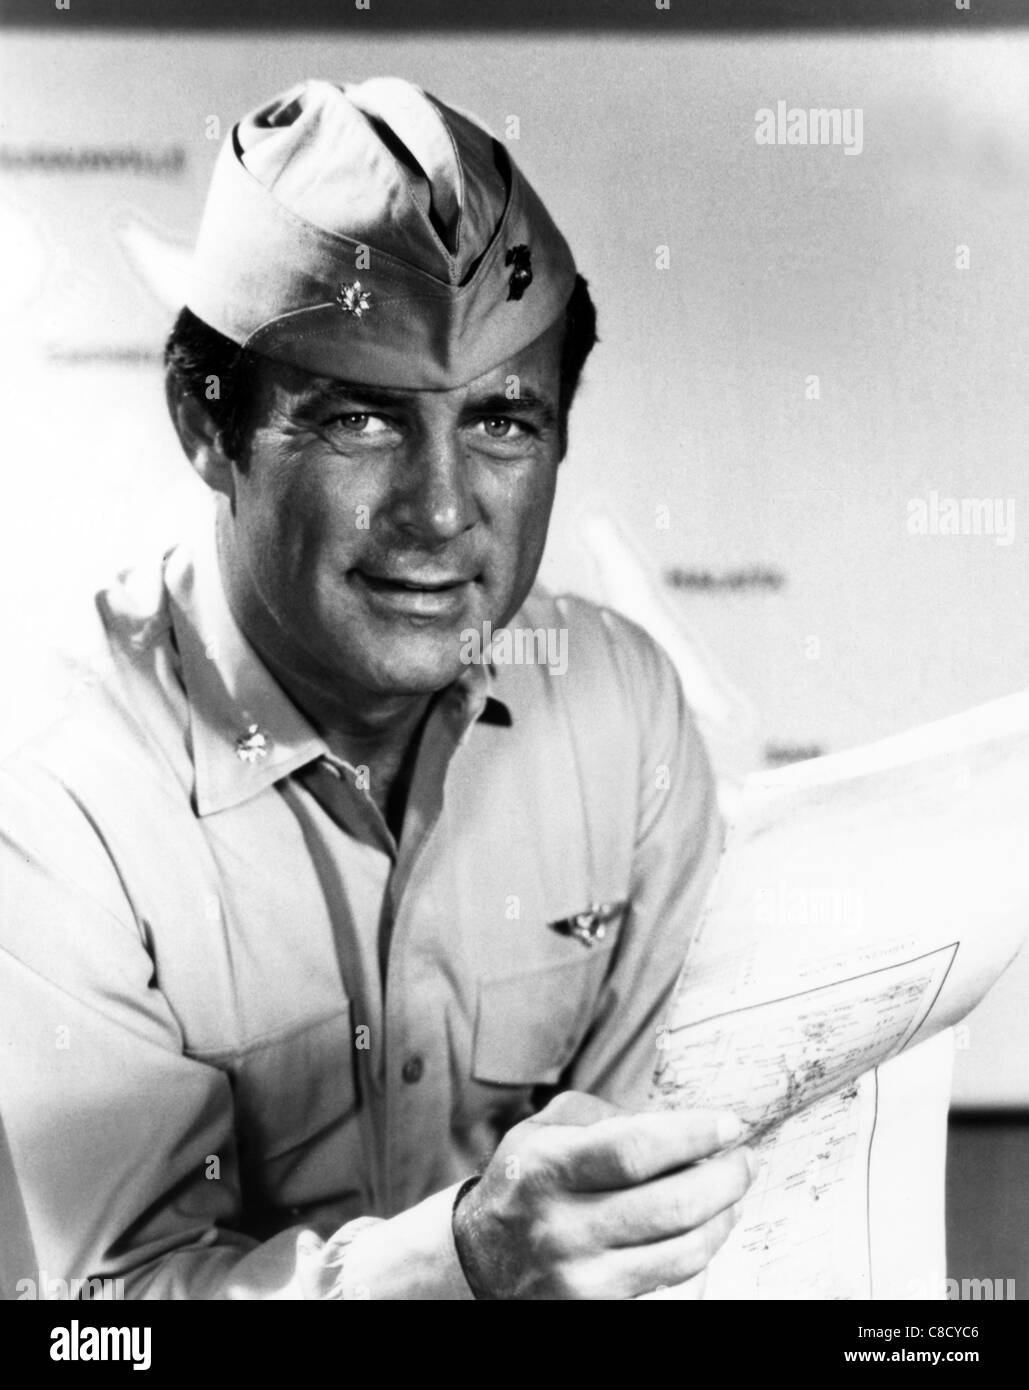 Robert Conrad High Resolution Stock Photography and Images - Alamy